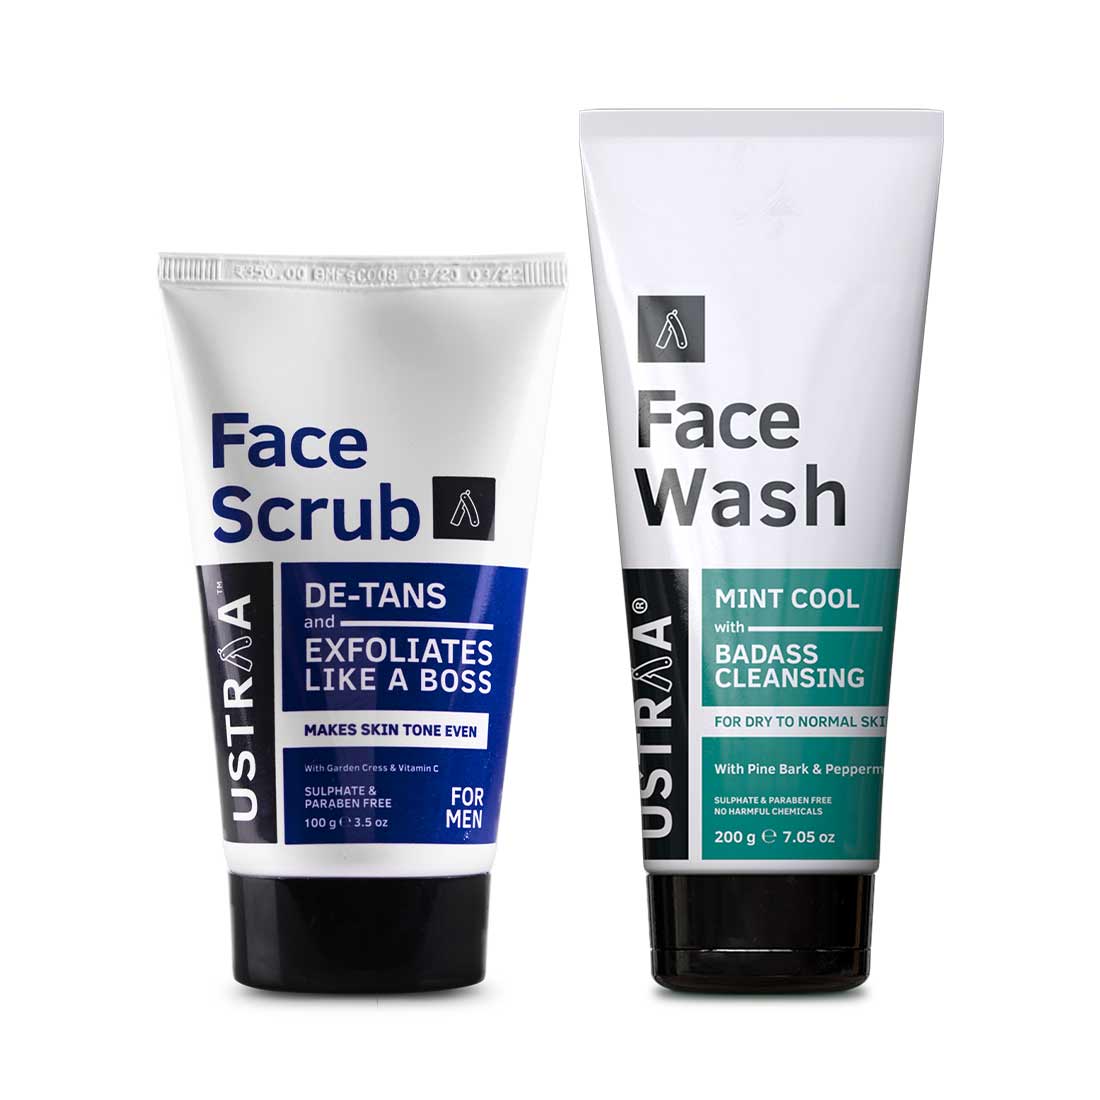 Face Wash - Dry to Normal Skin & Face Scrub